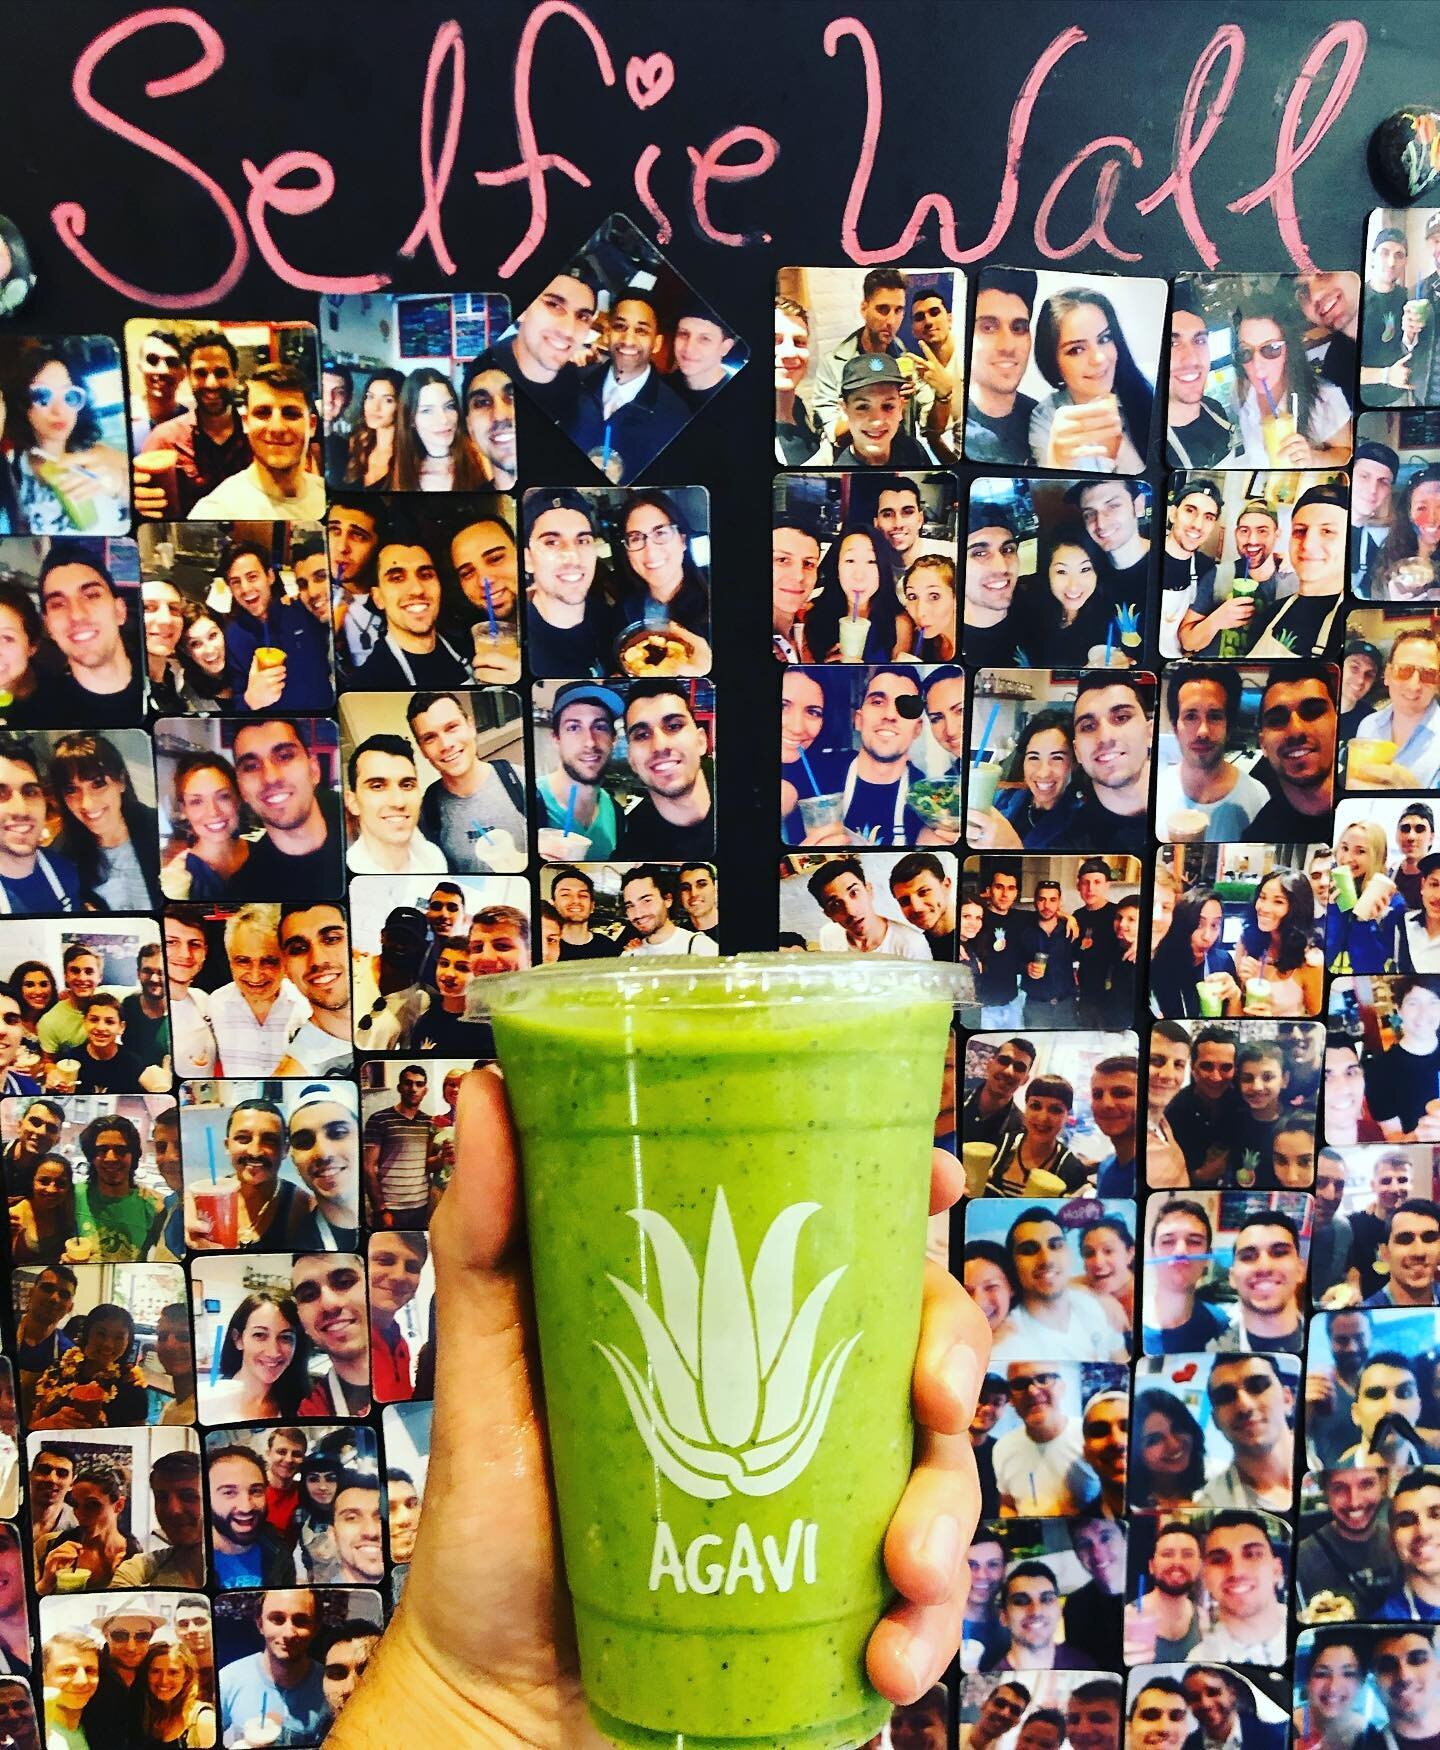 As you can see we LOVE selfies!
Come take one with us ❤️😜

📍 EAST VILLAGE
💌 Catering: info@agavijuice.com
✨ 100% Raw 100% Vegan 100% Love
🏳️&zwj;🌈 Proudly serving organic acai bowls &amp; juices!
📸 Tag us in your #AGAVI photos!
.
.
AGAVI JUICE 